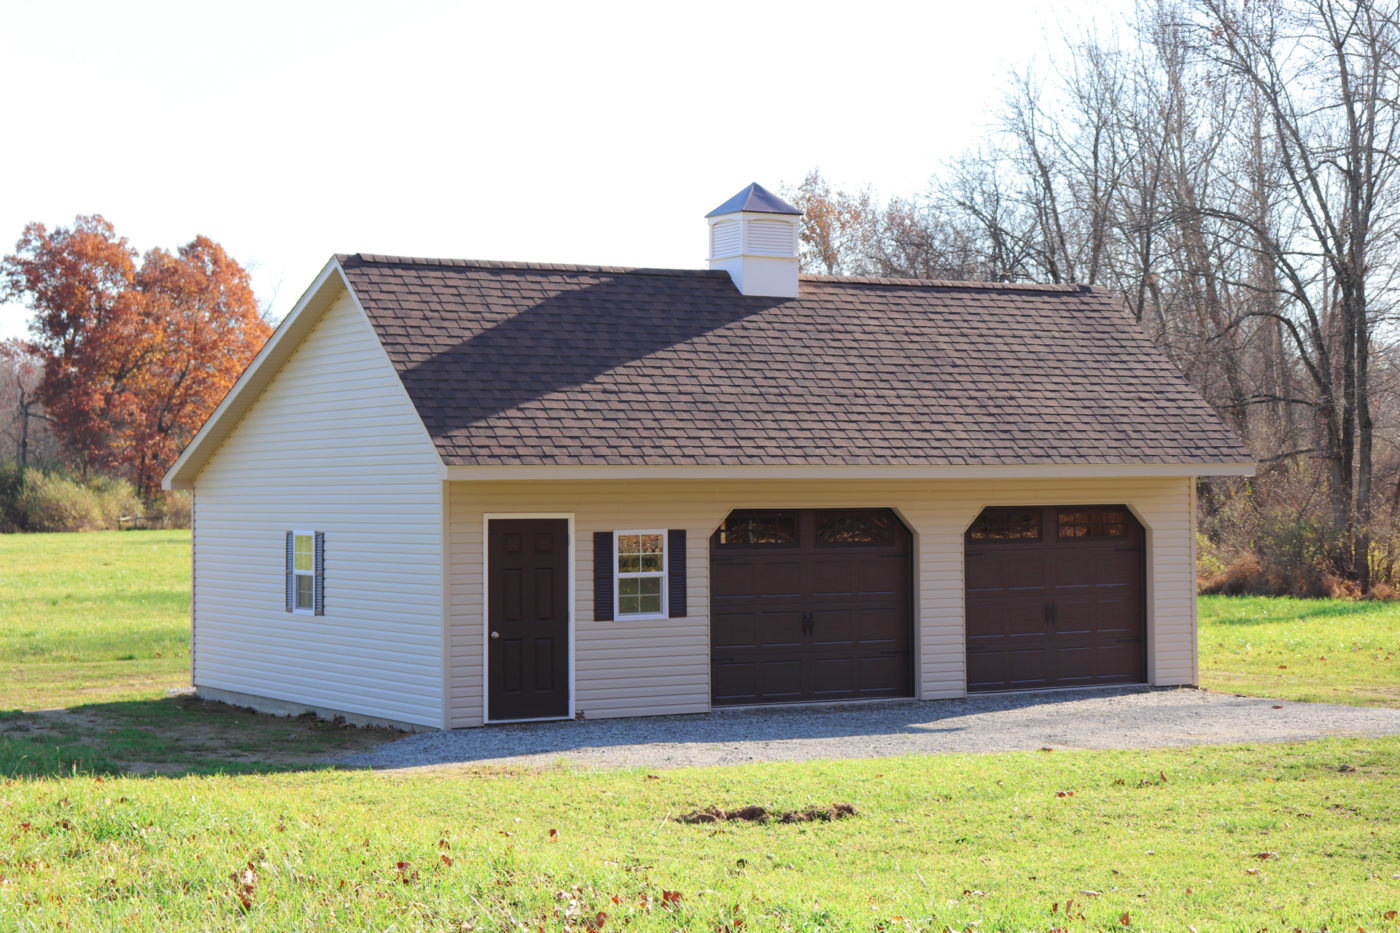 exterior of one of many two car garage sheds for sale in PA